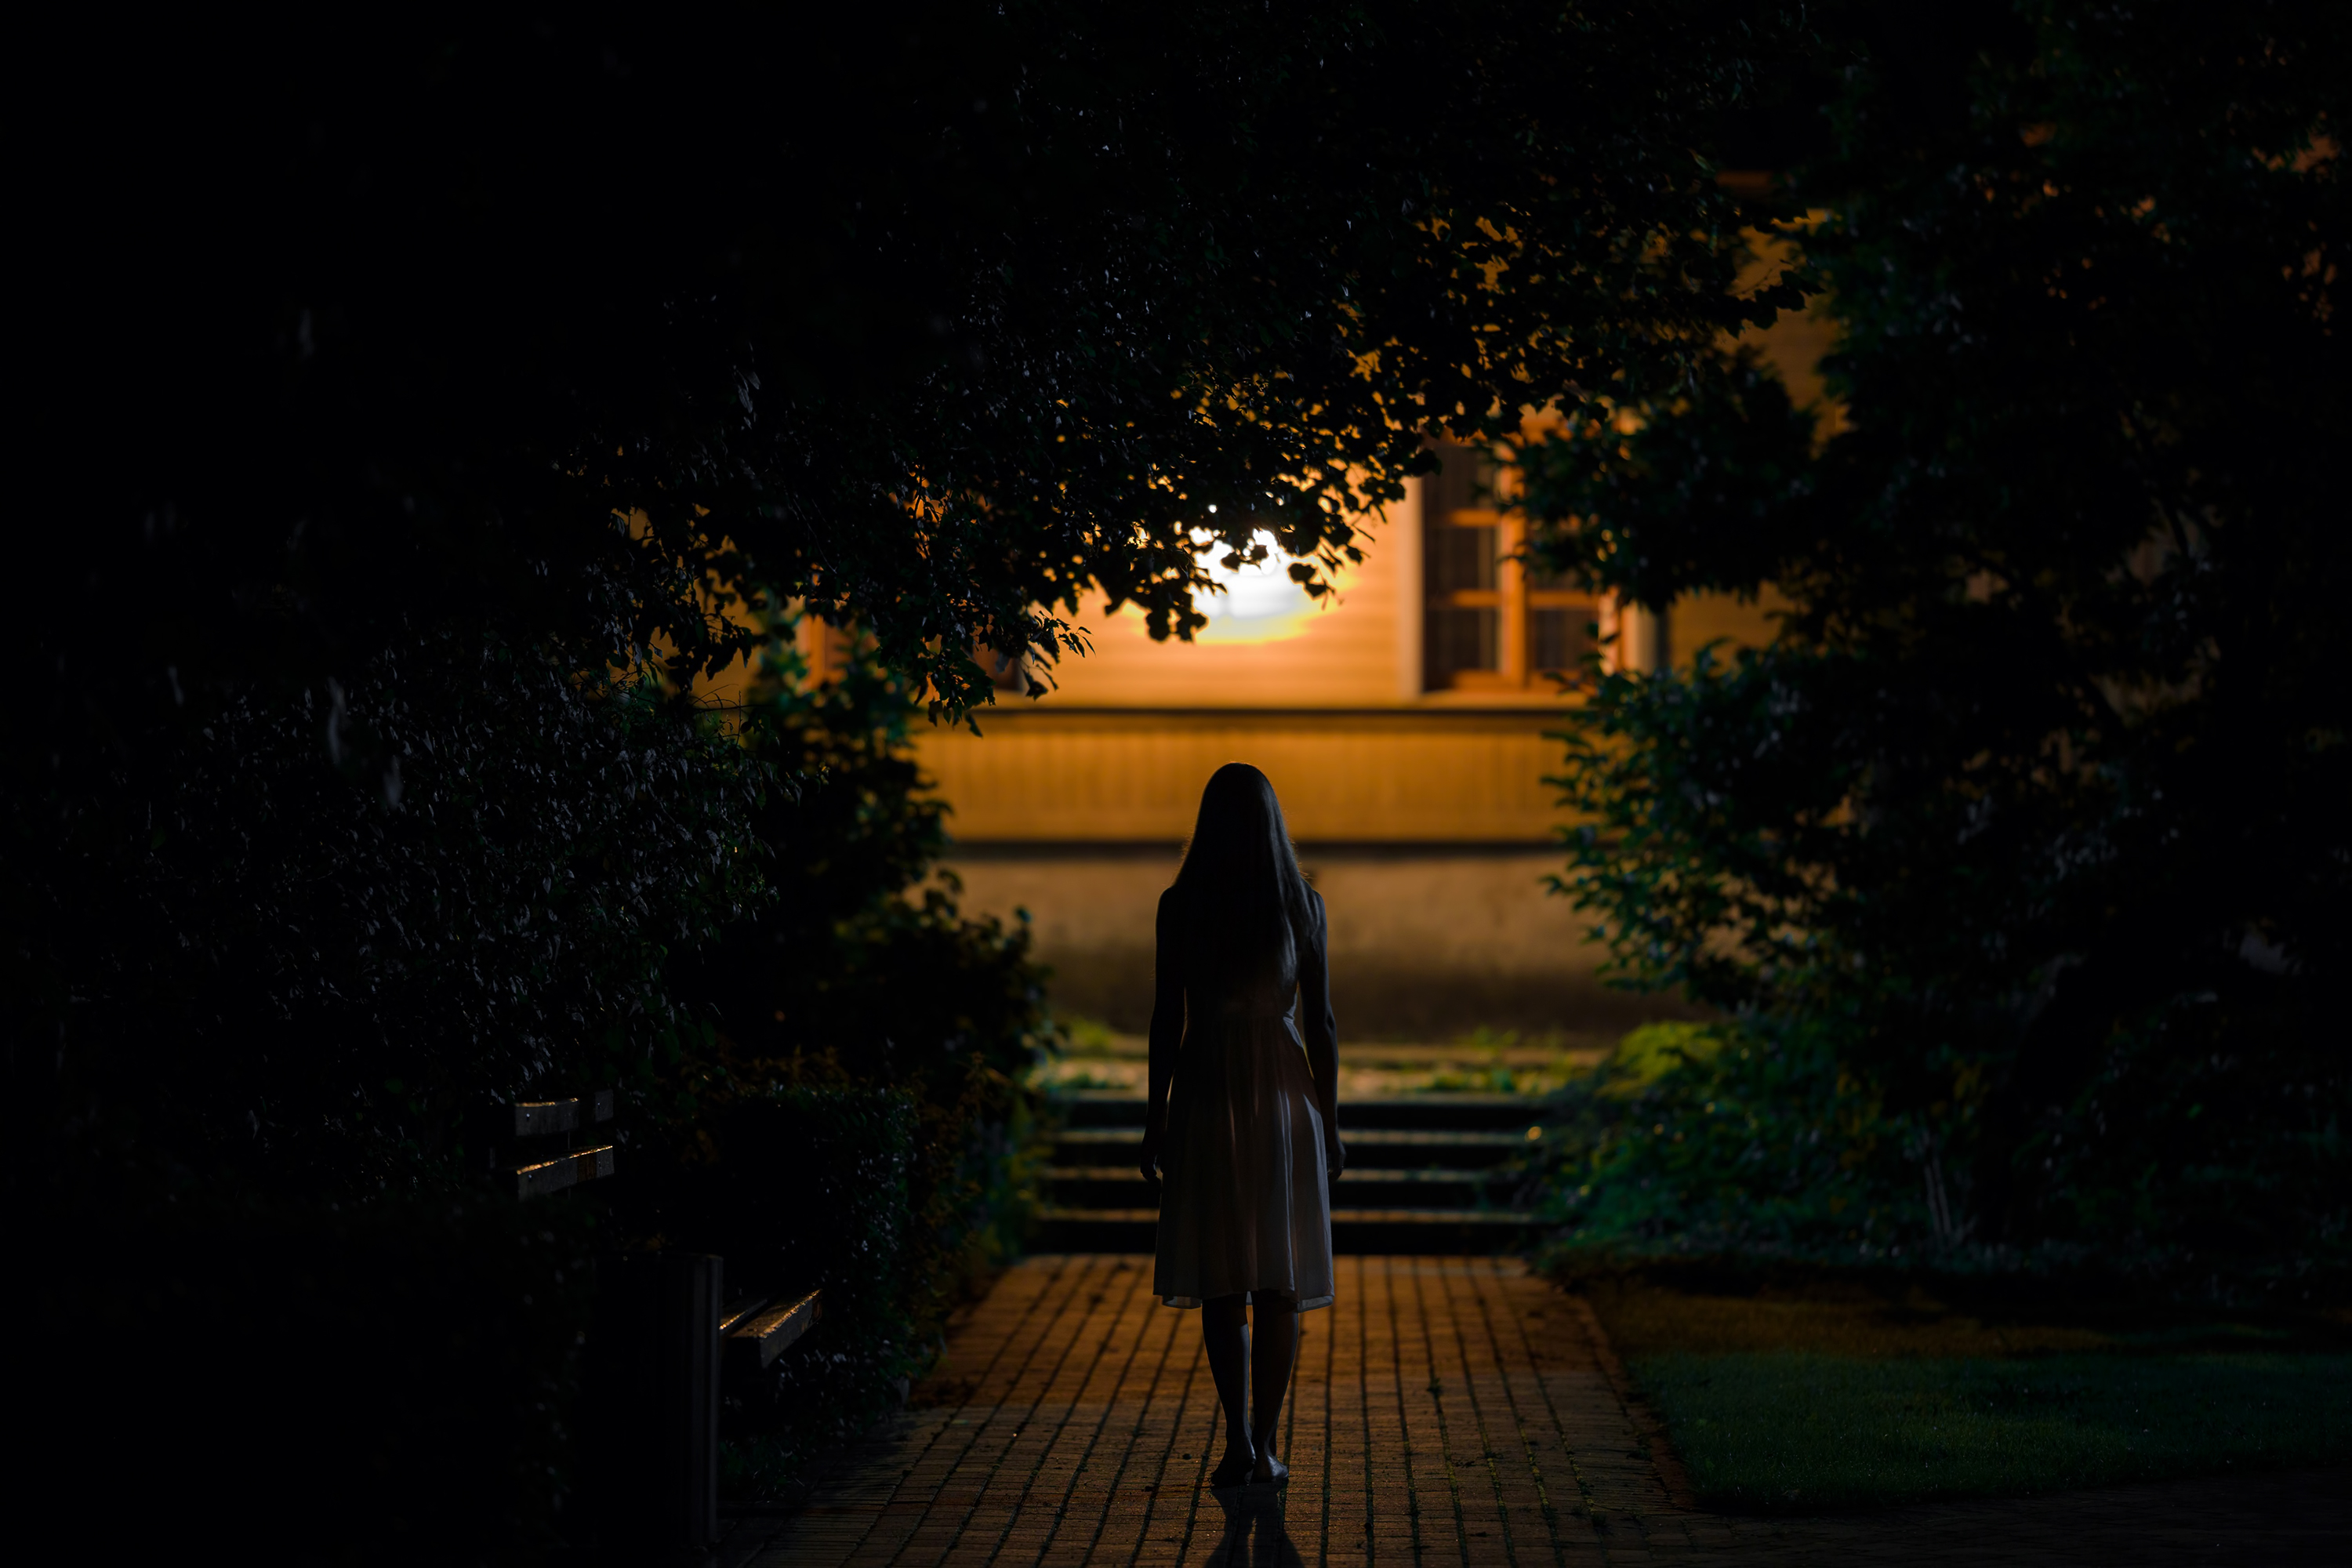 Woman at night | Source: Shutterstock